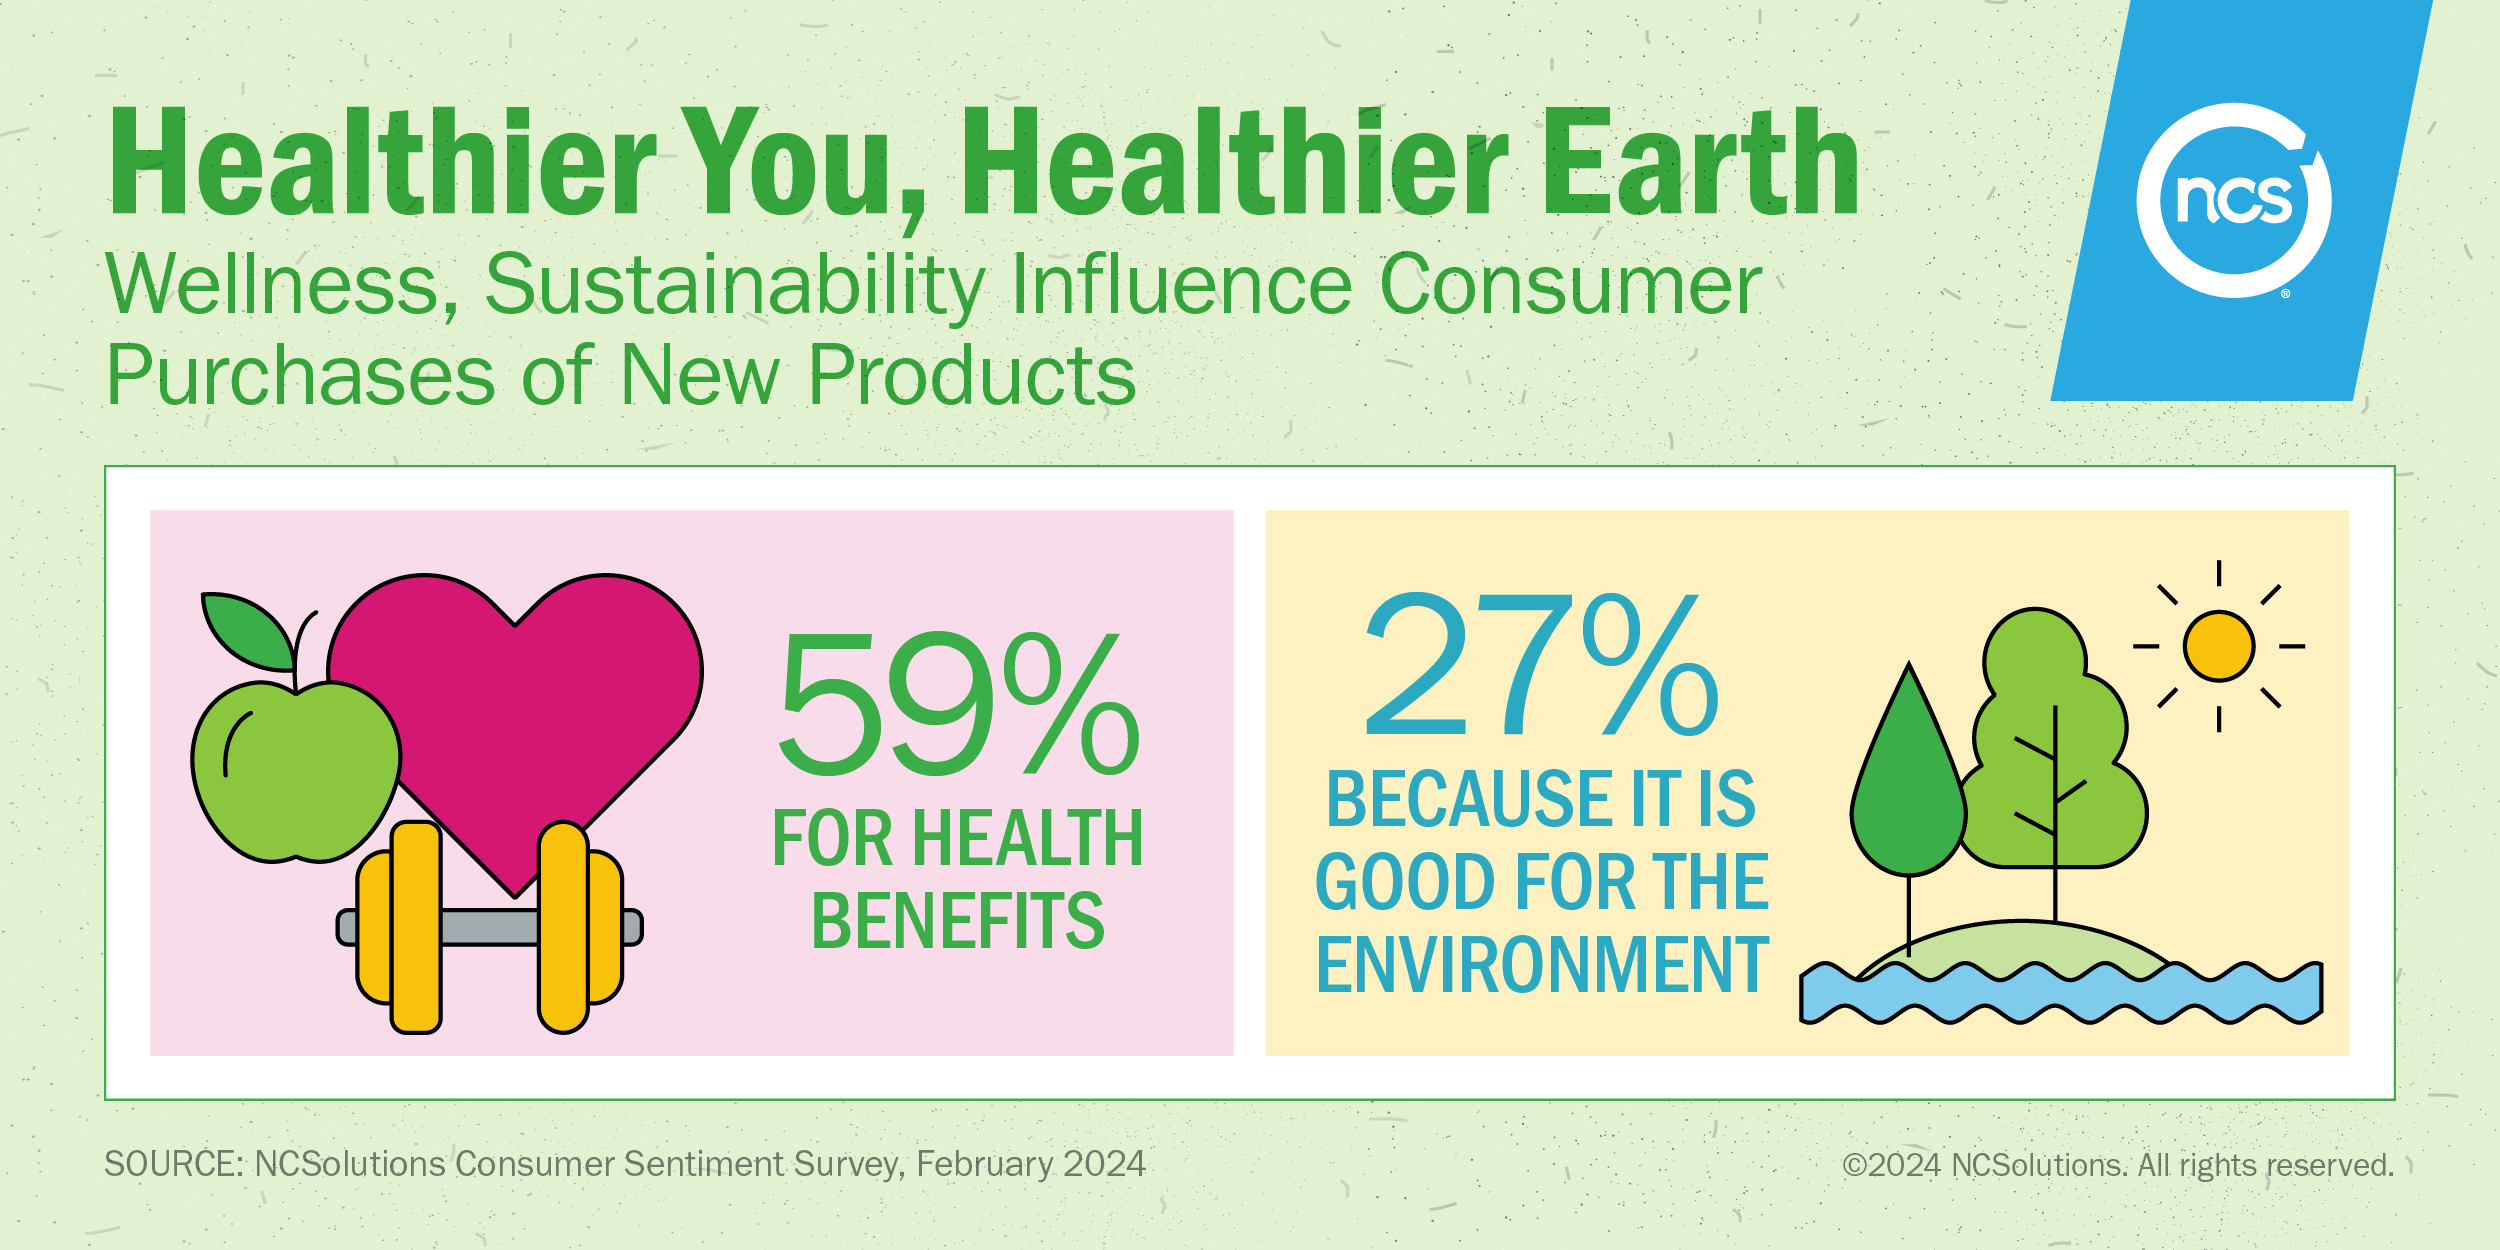 Healthier You, Healthier Earth is 59% for health benefits and 27% because it is good for the environment. 